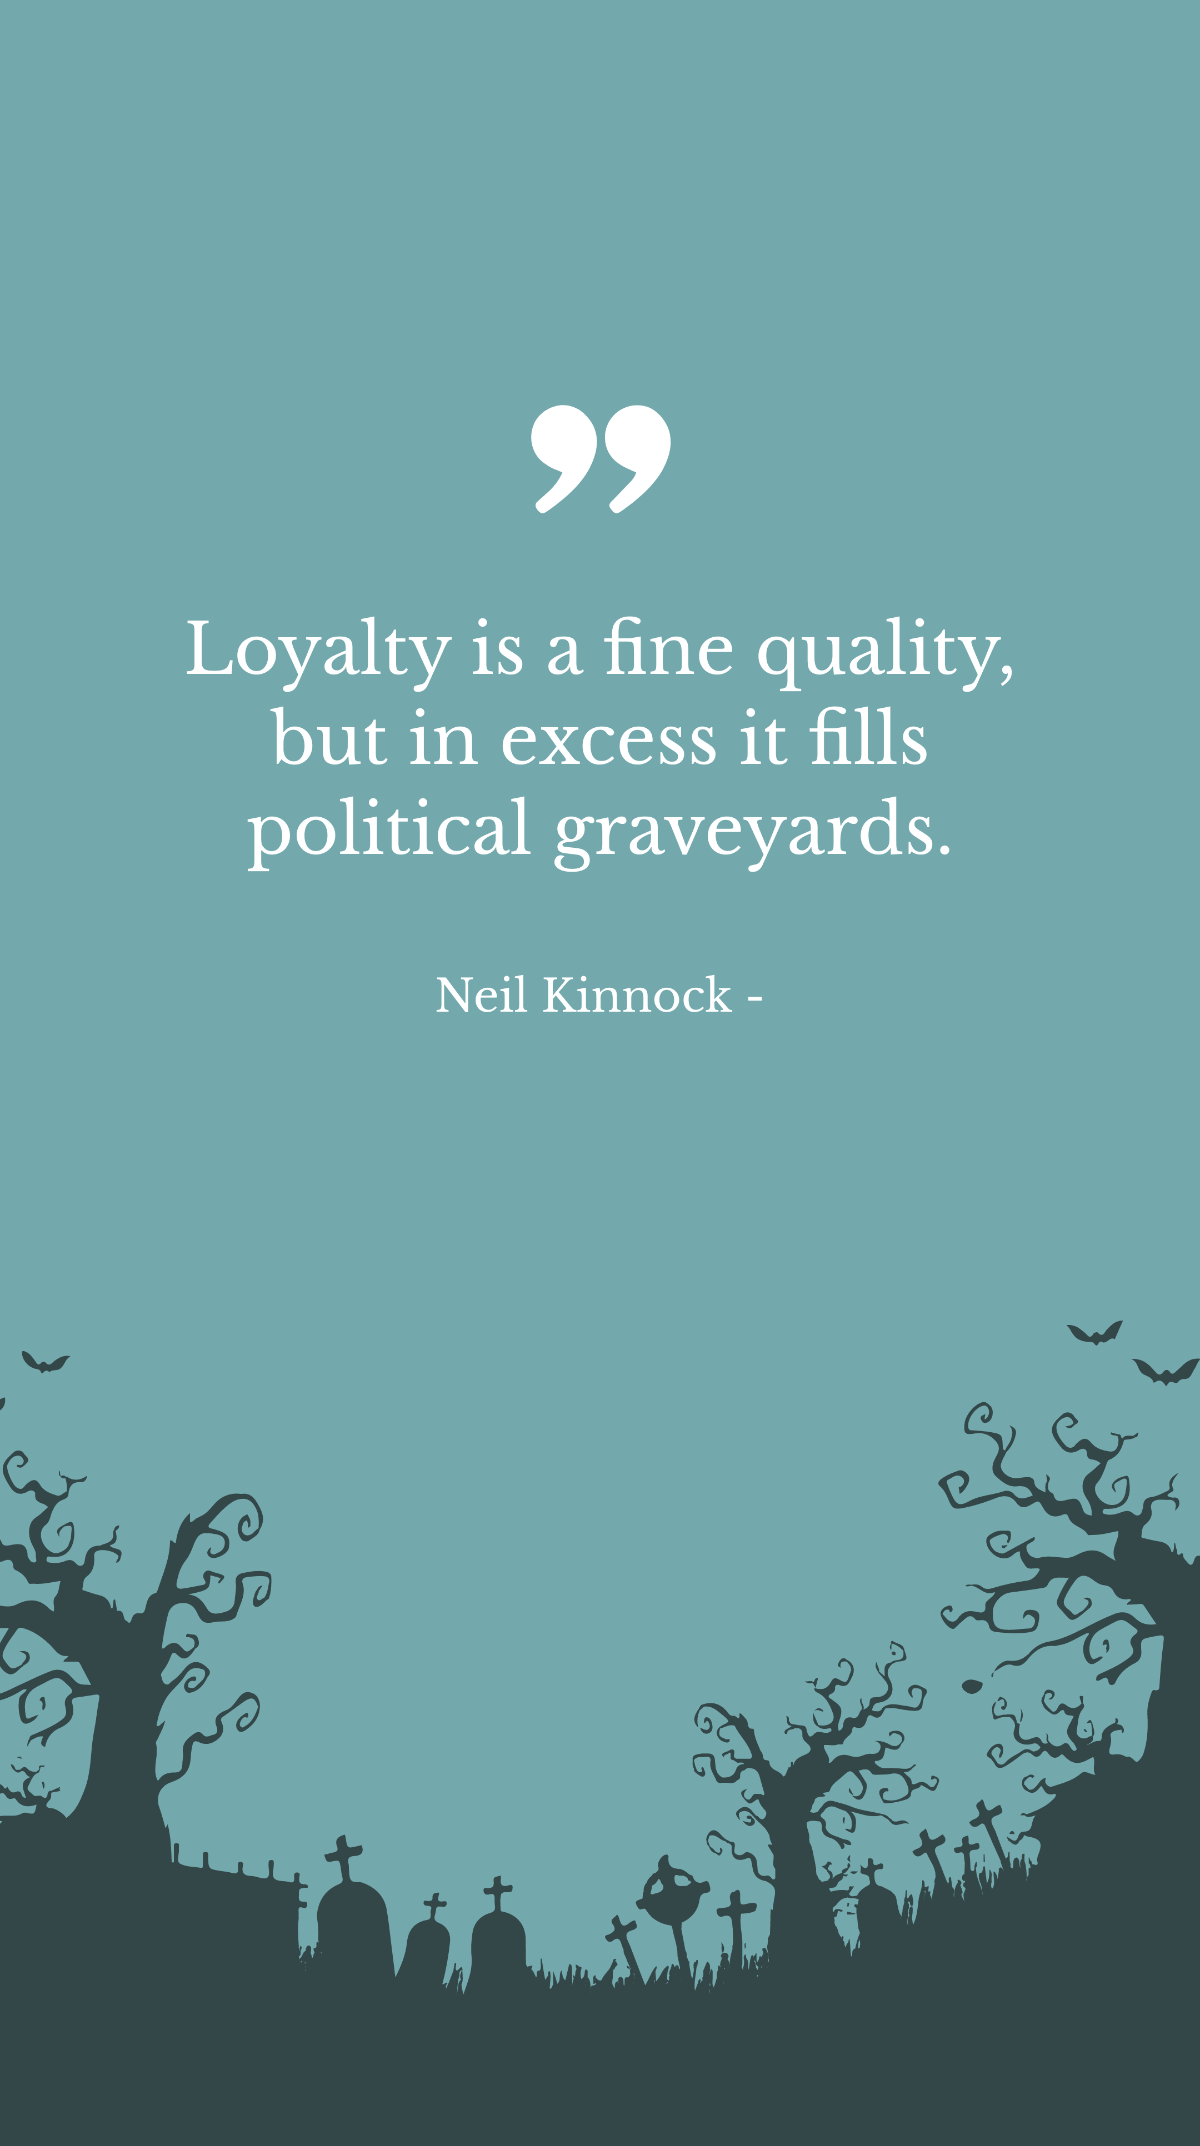 Neil Kinnock - Loyalty is a fine quality, but in excess it fills political graveyards. Template